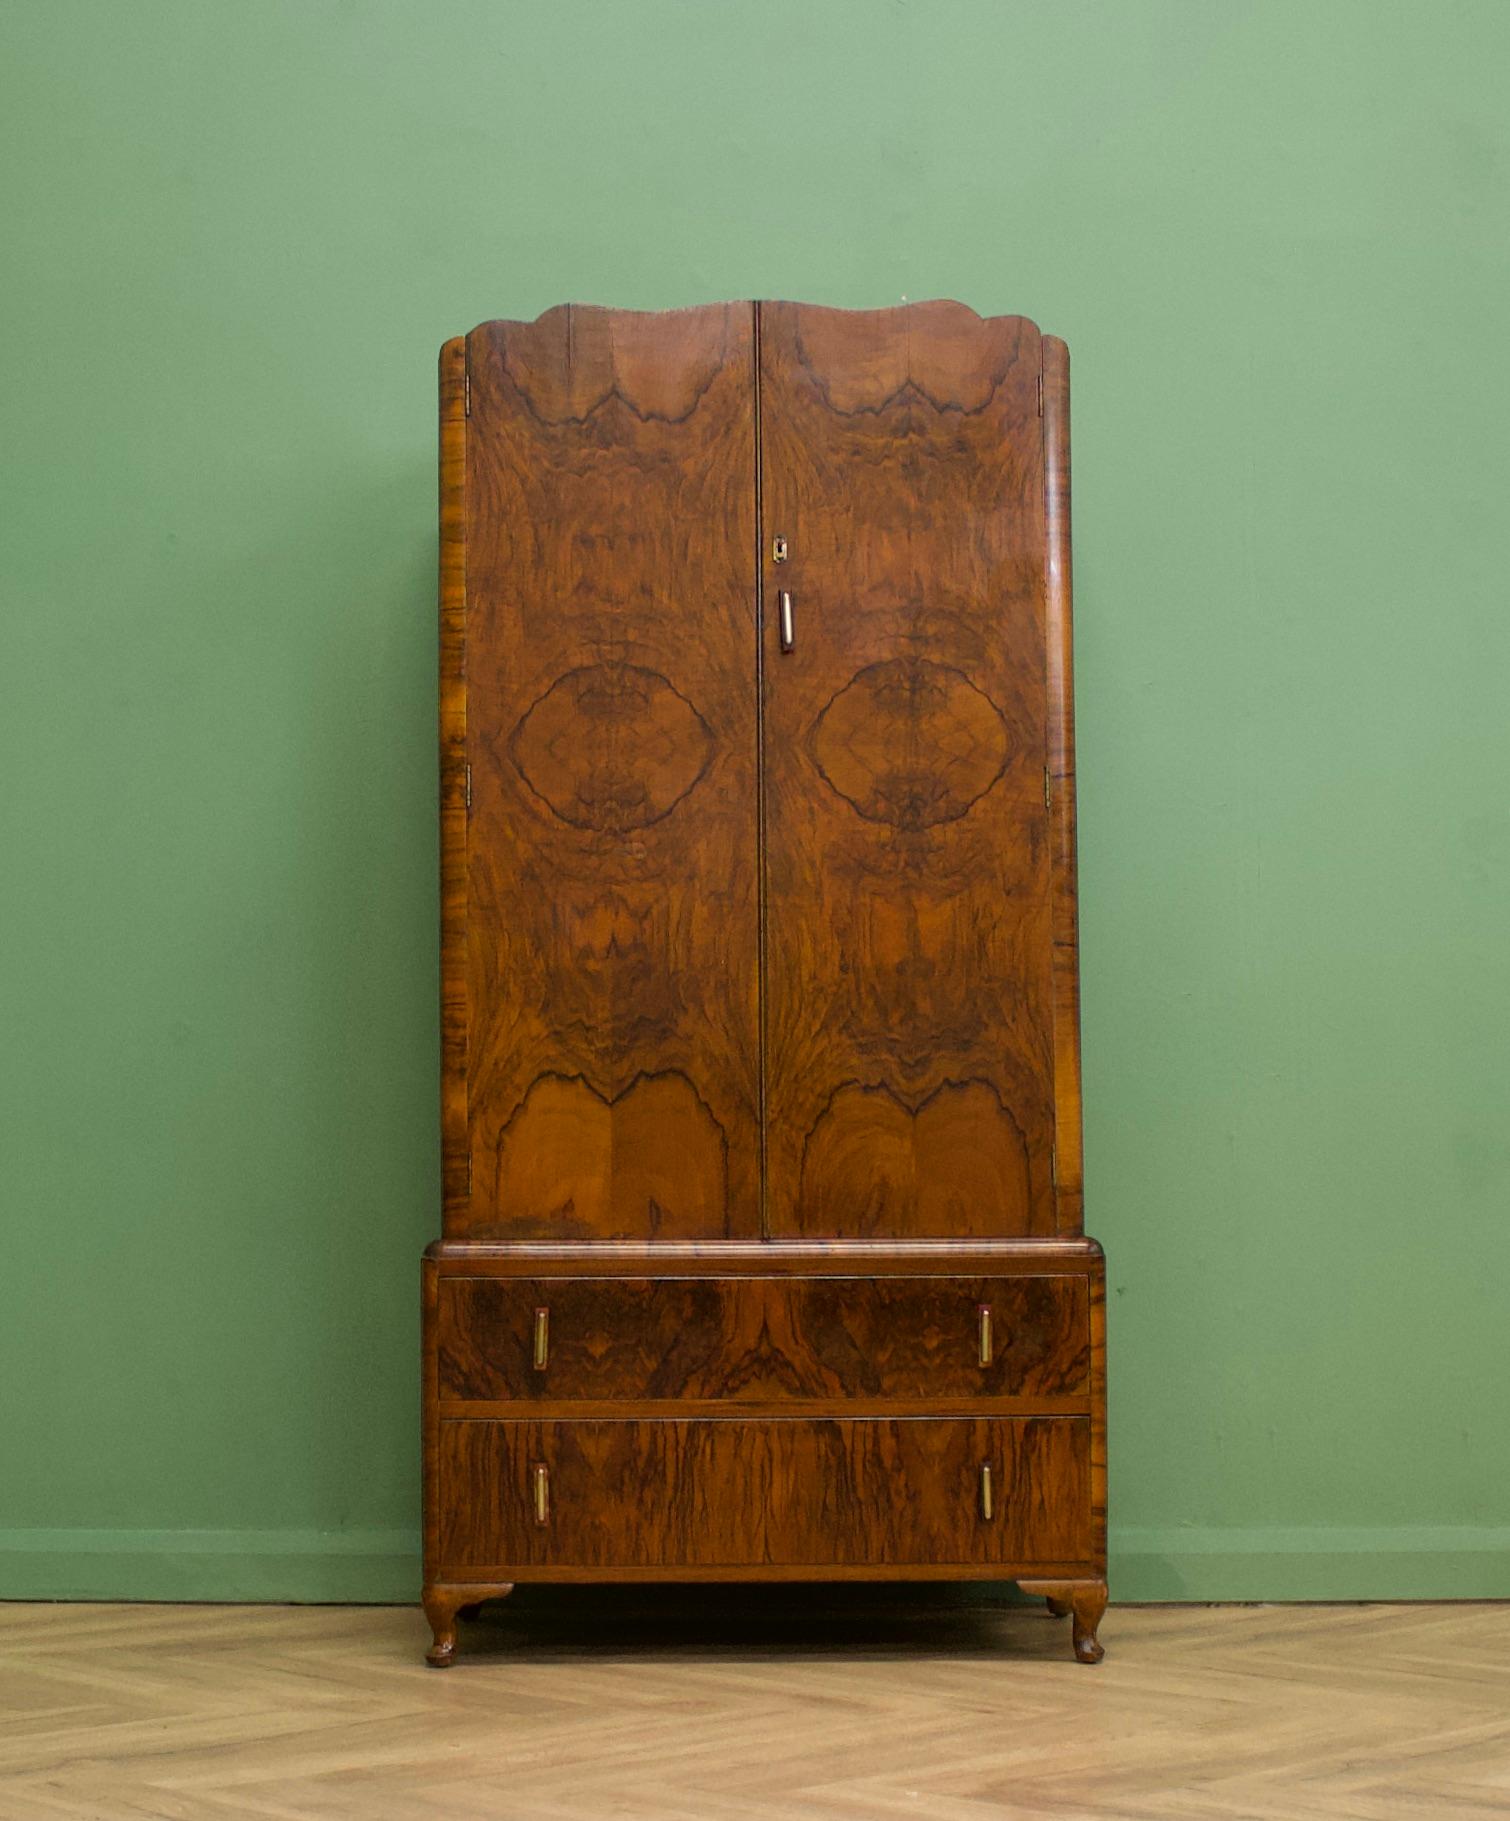 An impressive quality, 1930's burr walnut compact wardrobe - perfect for a maximalist interior
Featuring a pull out rail to the top and two drawers to the bottom